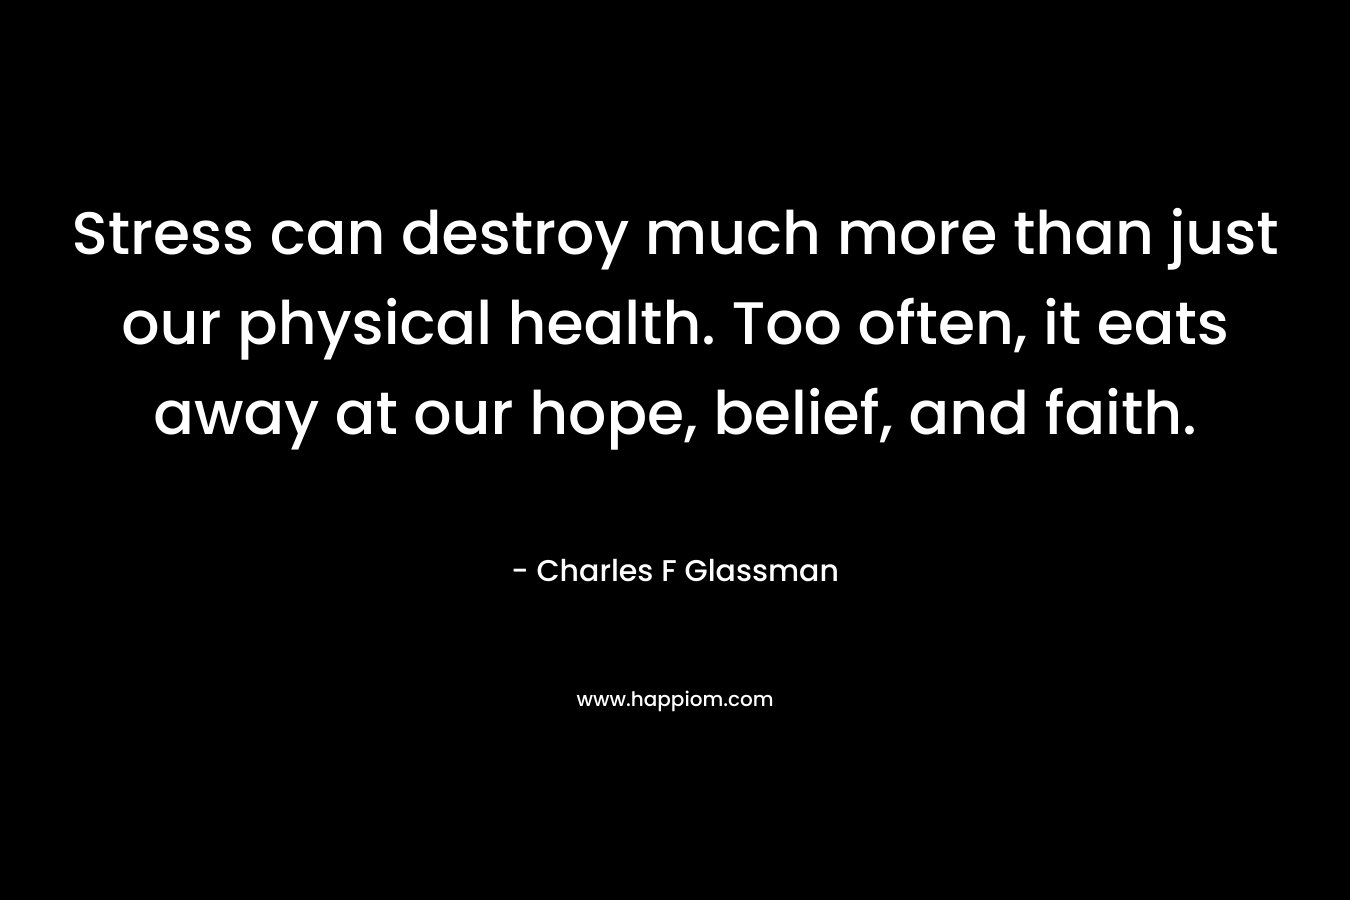 Stress can destroy much more than just our physical health. Too often, it eats away at our hope, belief, and faith. – Charles F Glassman